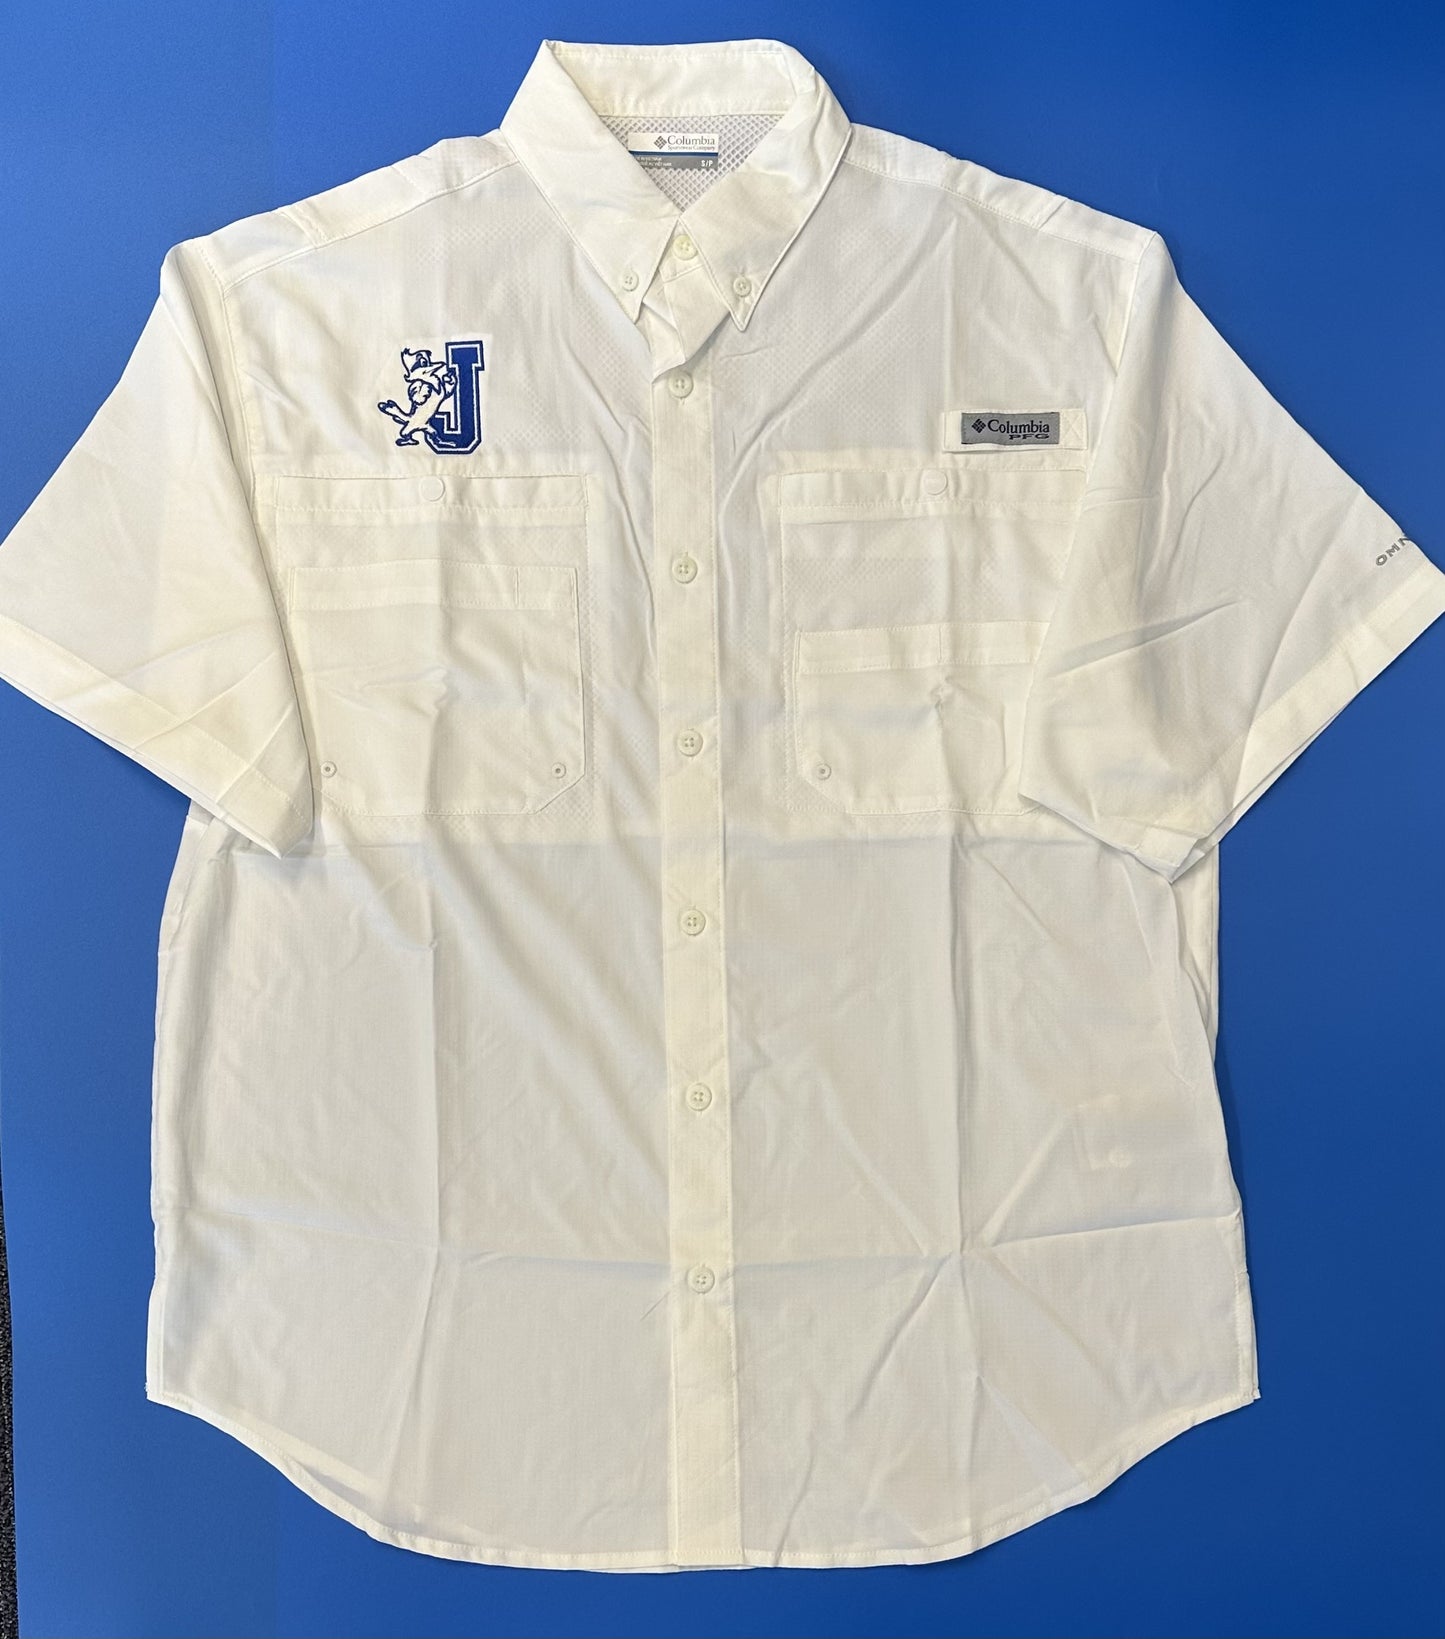 Columbia.  Omni-WICK™ Omni-SHADE™ UPF 40 sun protection Vented Quick dry Rod Holder  FABRIC Shell: 100% Polyester ripstop100% Polyester.  J/Jayson embroidered logo.